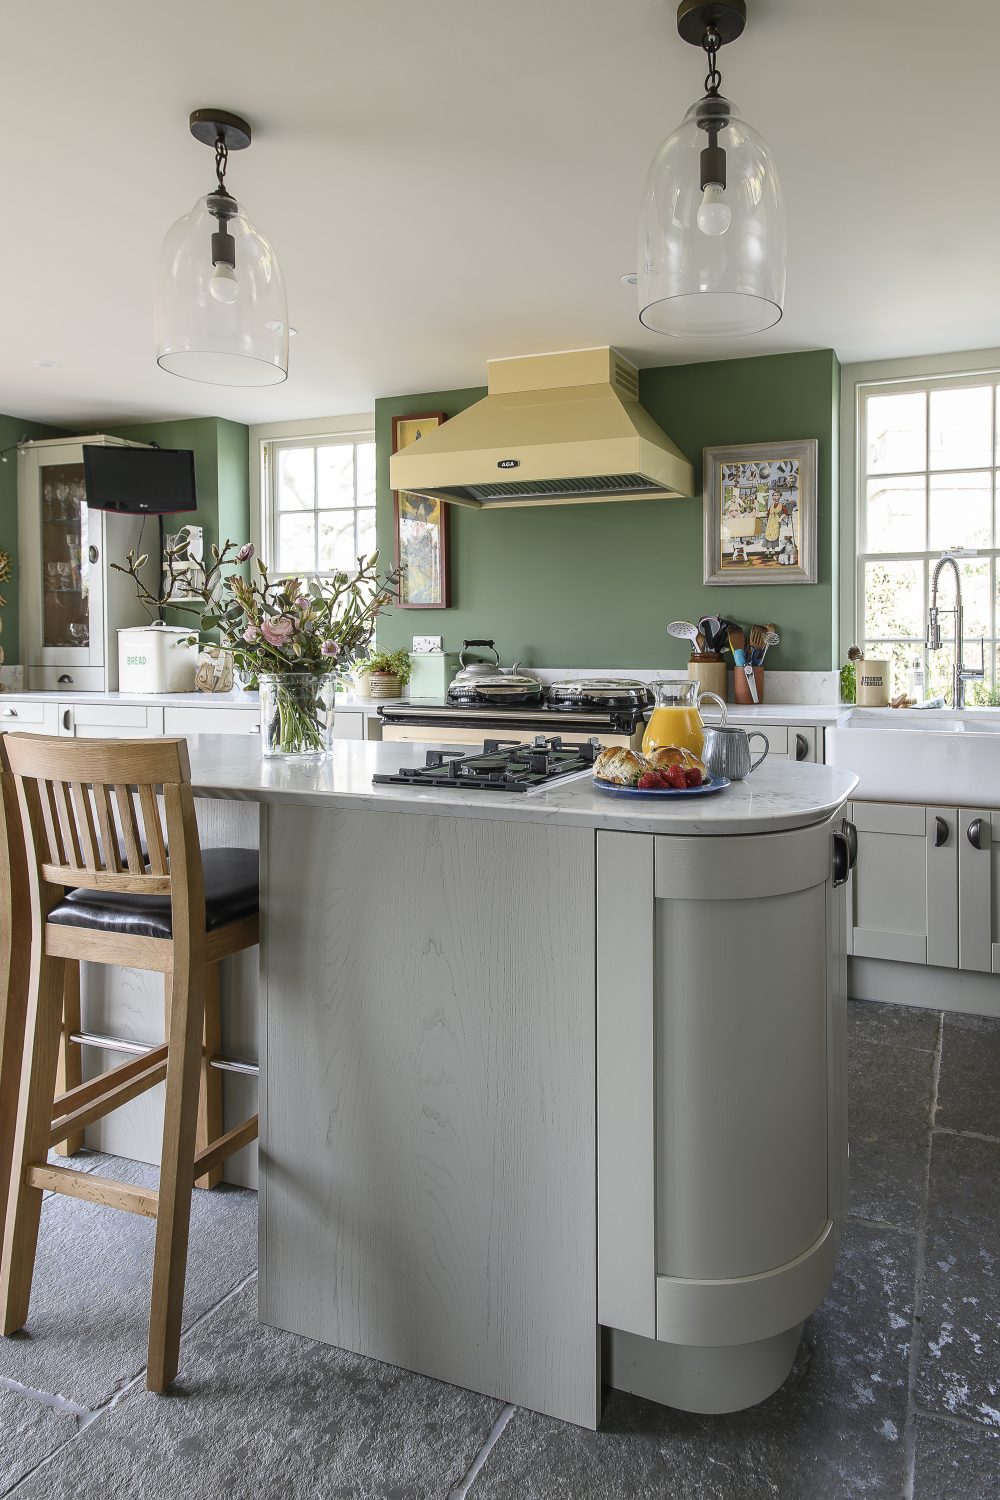 The new kitchen by Howdens spans across the back of the house and opens into the garden